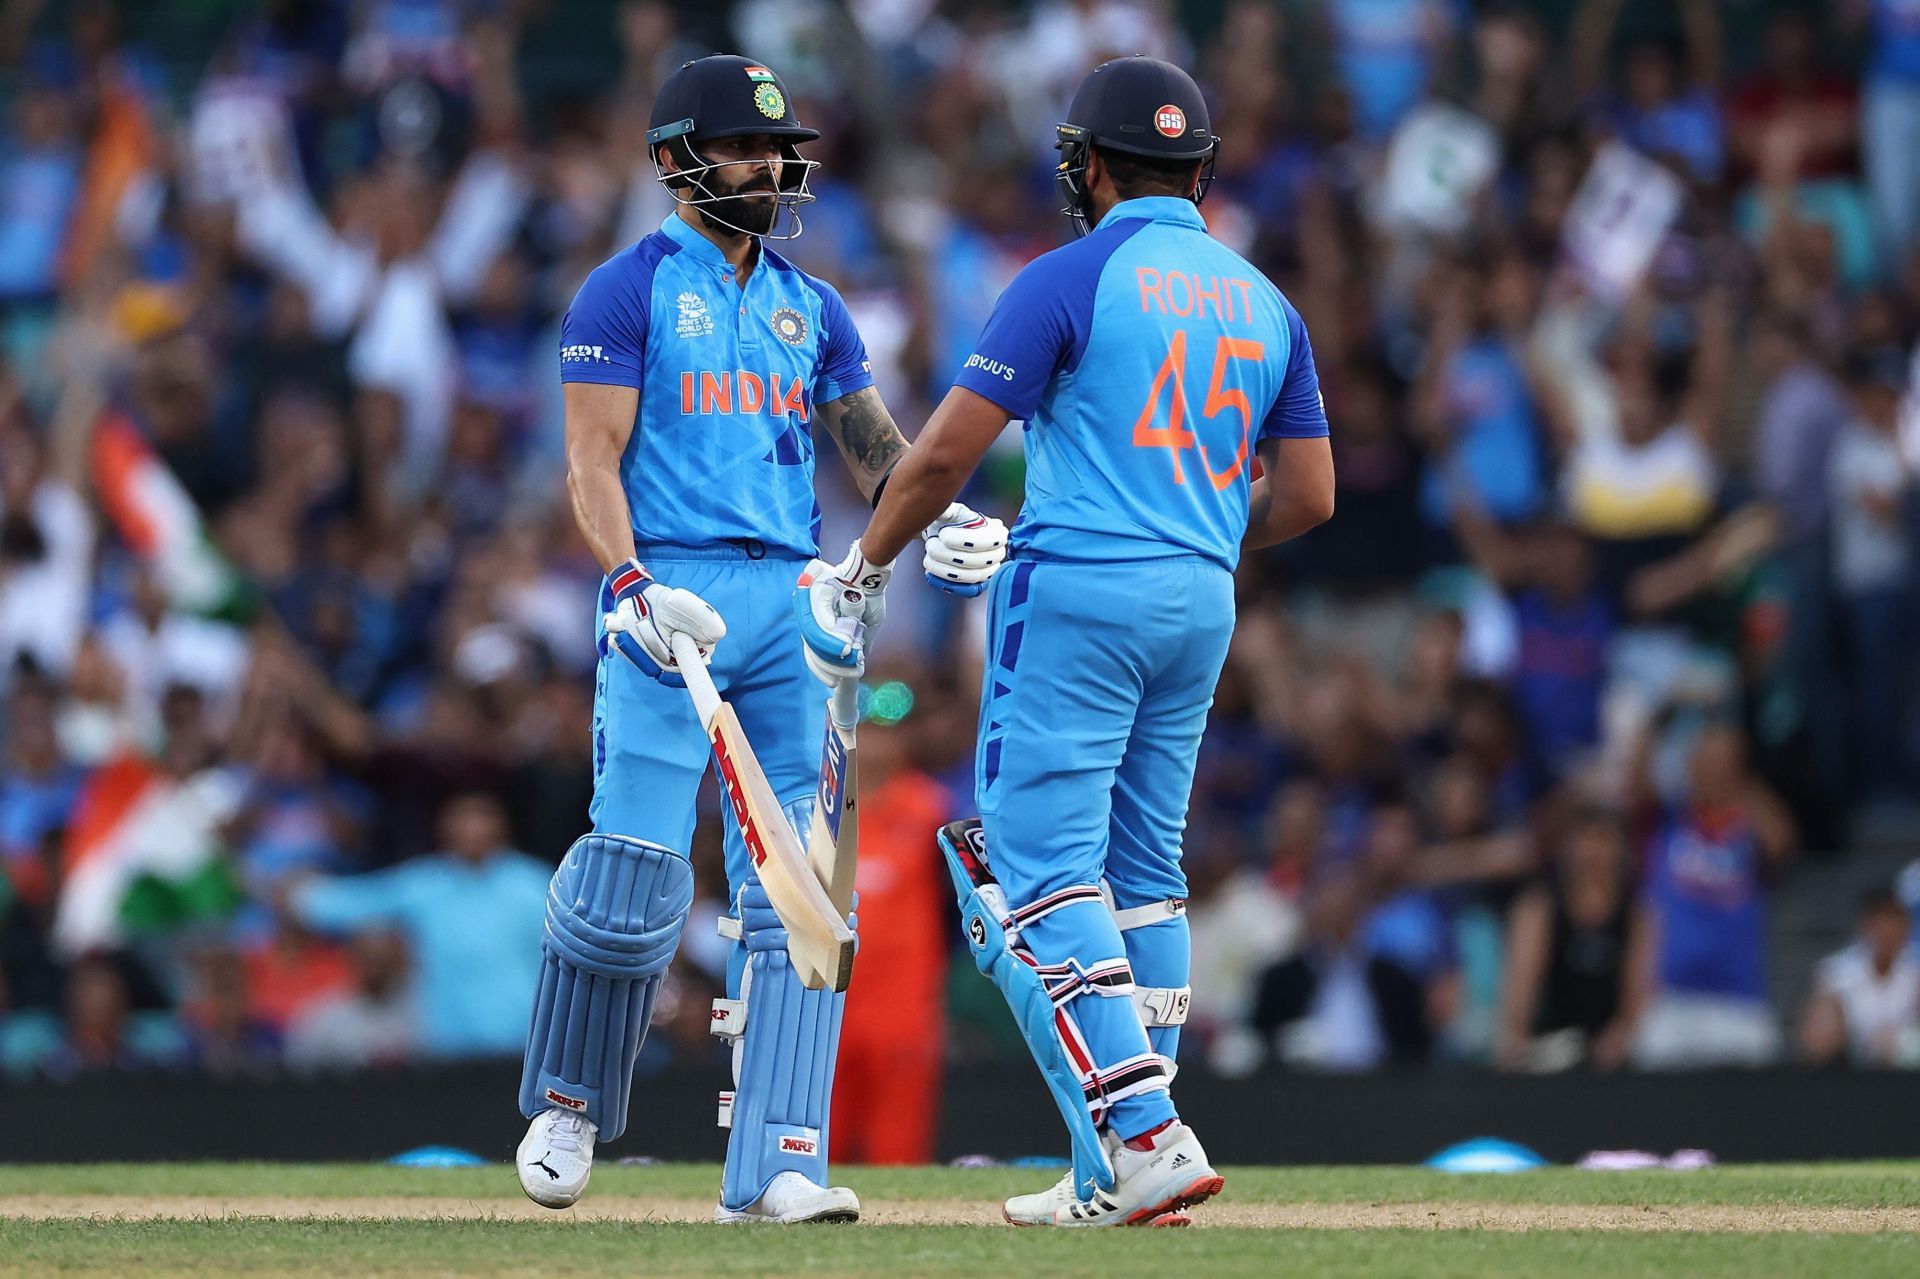 Virat Kohli and Rohit Sharma strung together a 73-run partnership for the second wicket.